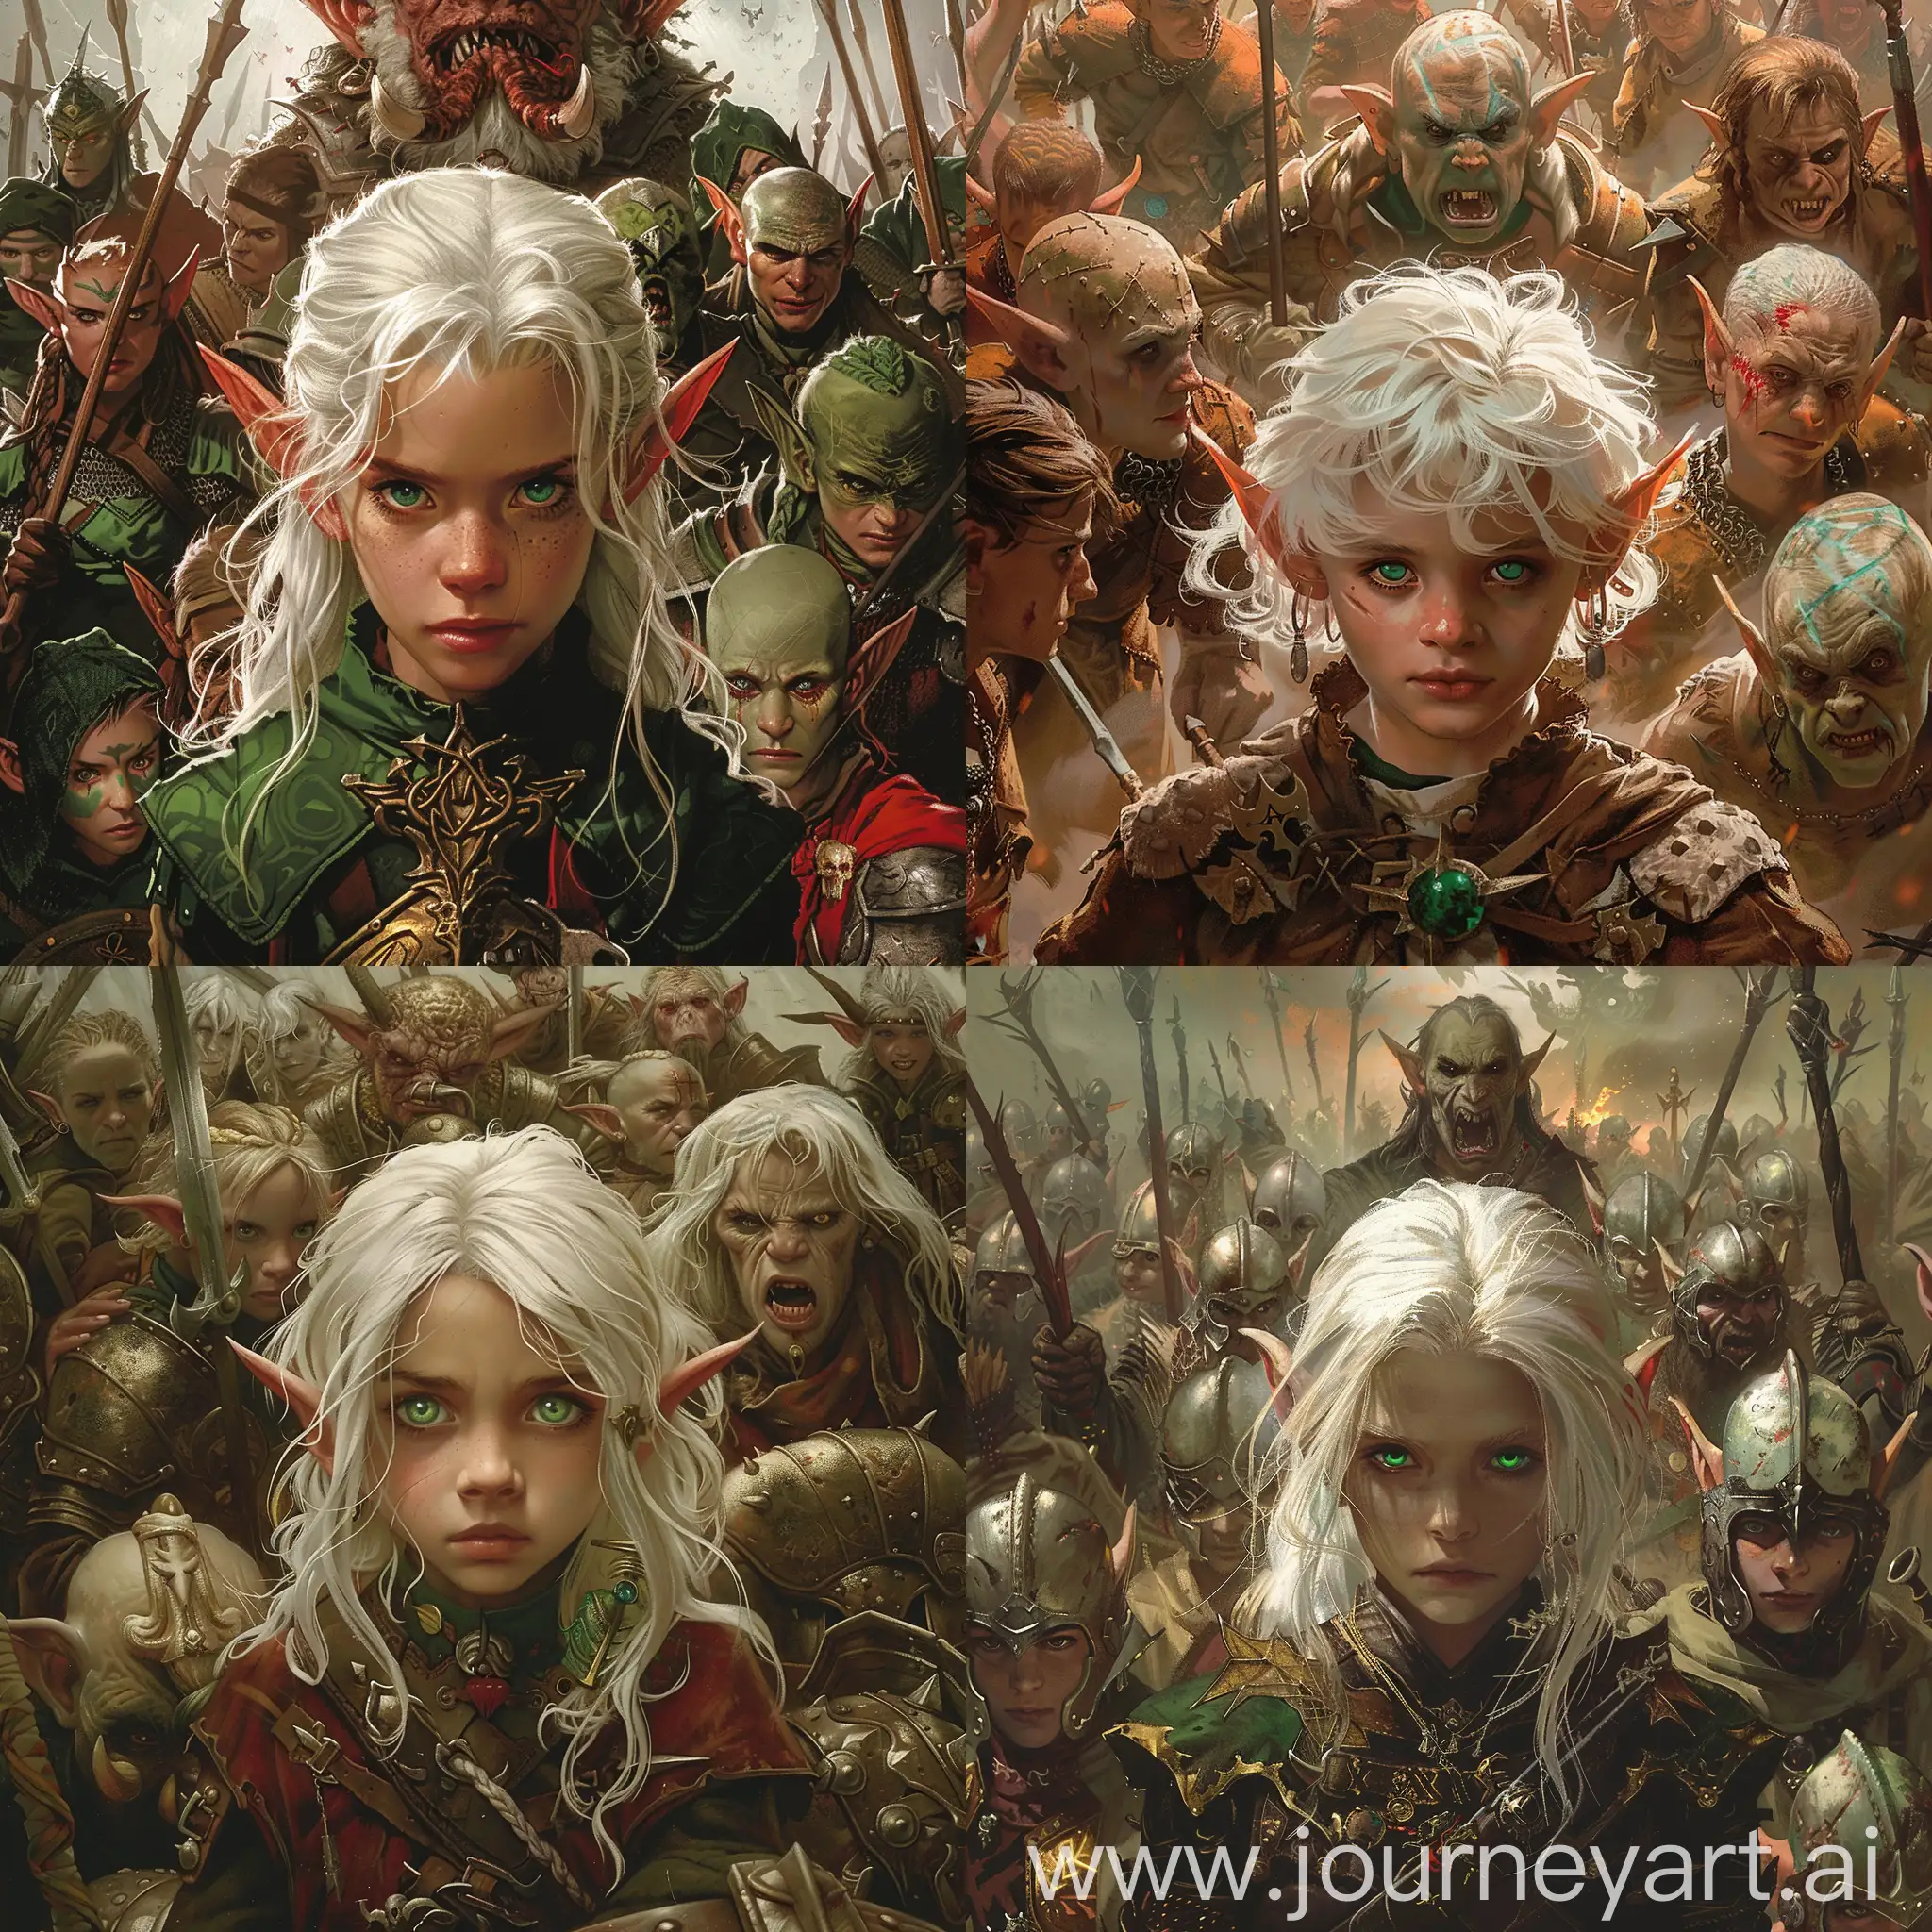 a young elf with white hair and emerald eyes surrounded by a company of warrior elves with a sadistic goblin figure in the background